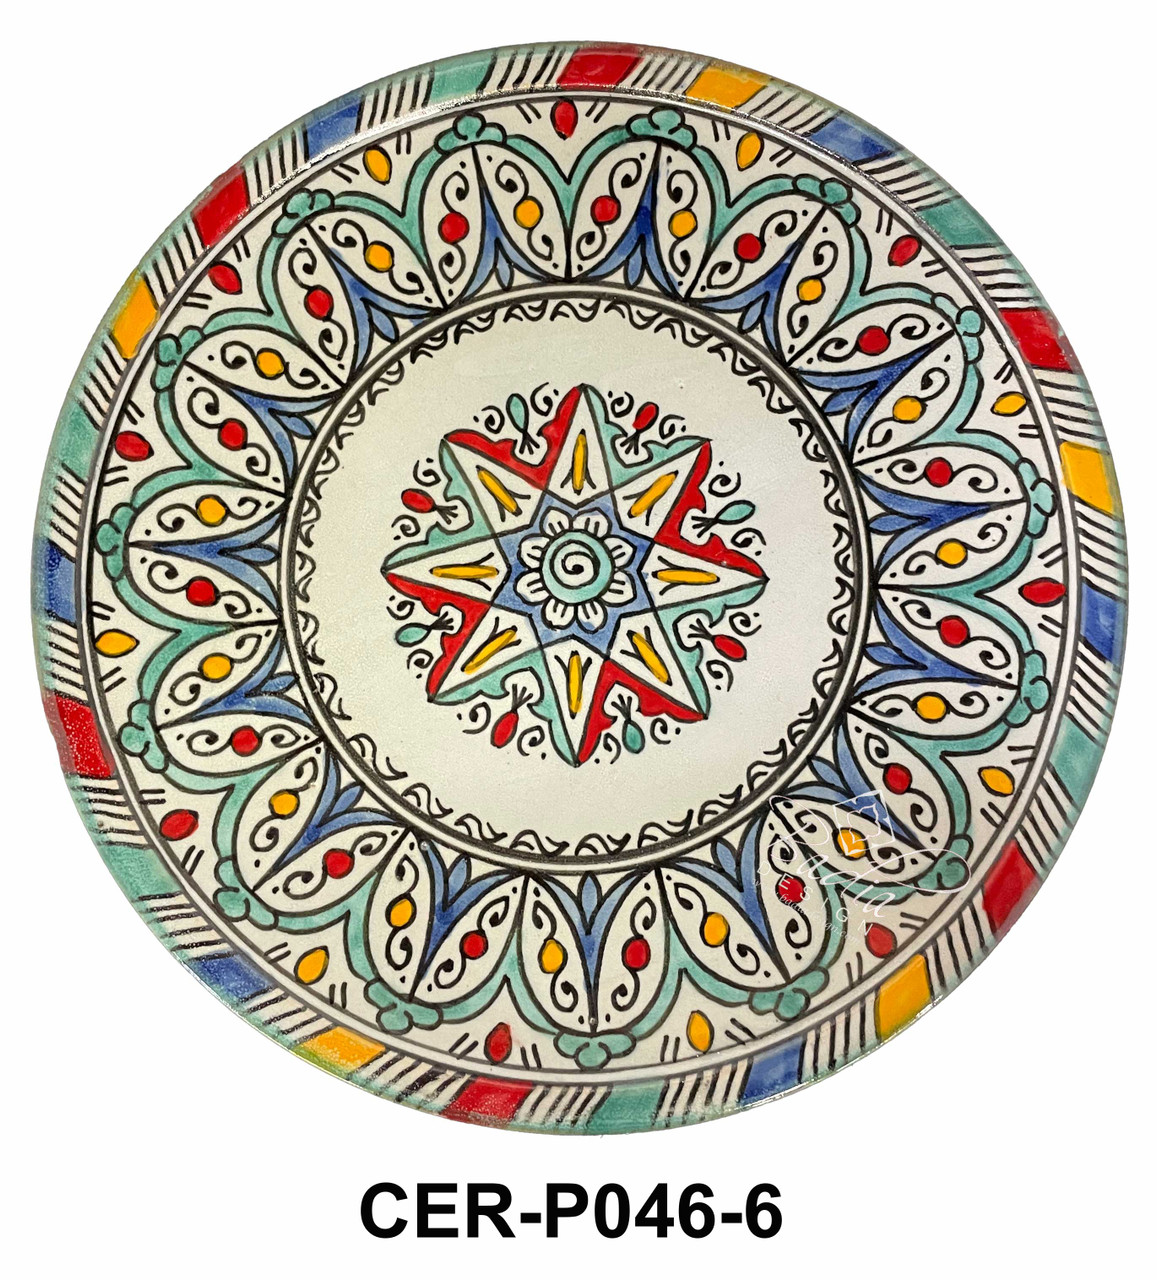 11 Inch Wide Hand Painted Multi-Color Ceramic Plates - CER-P046